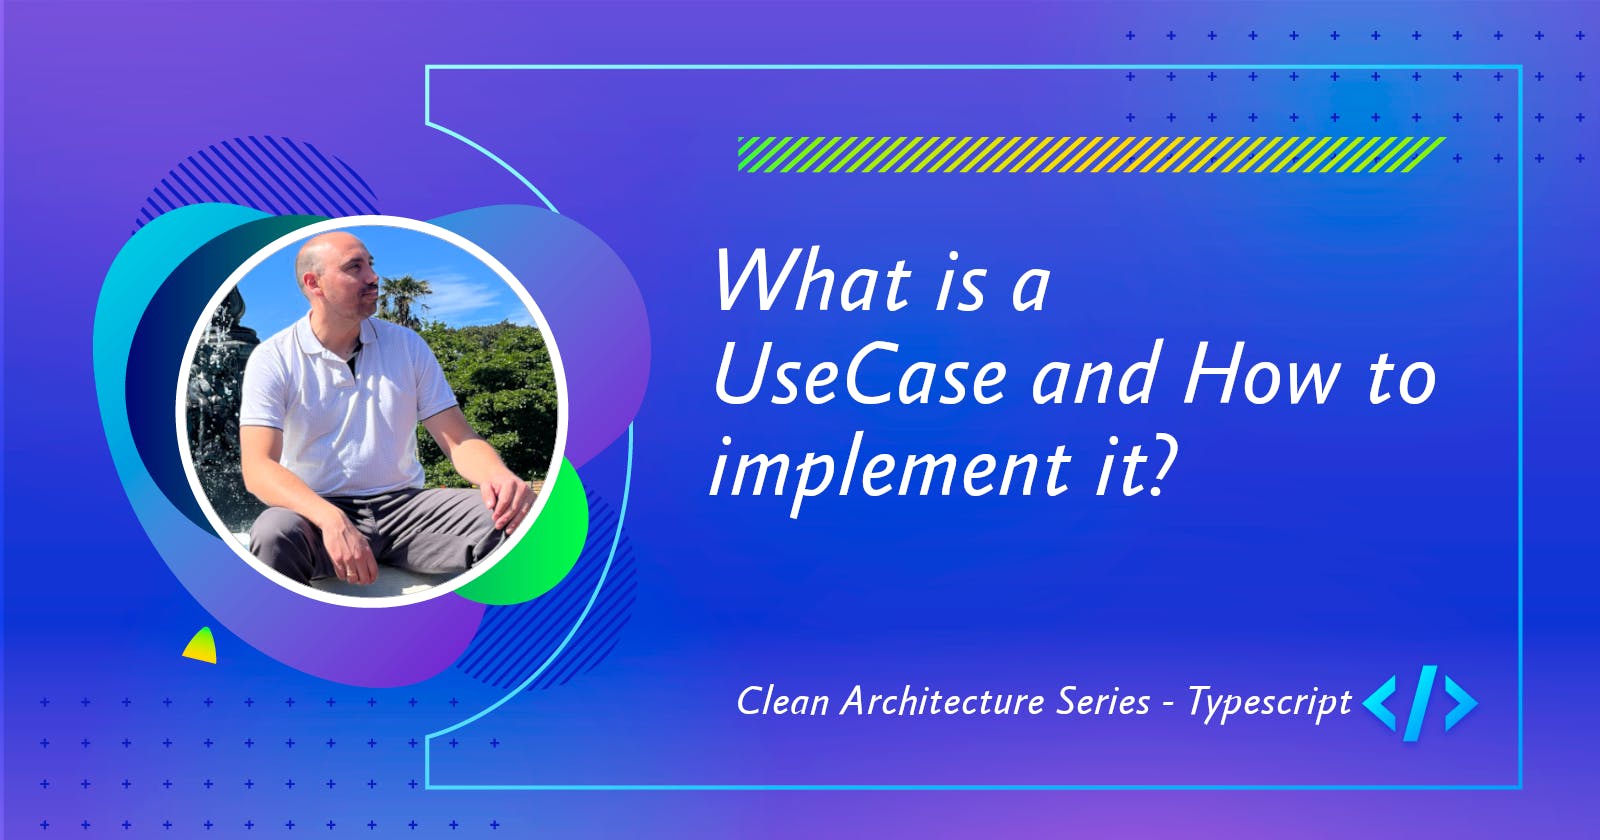 What is a Use Case and how to implement it?